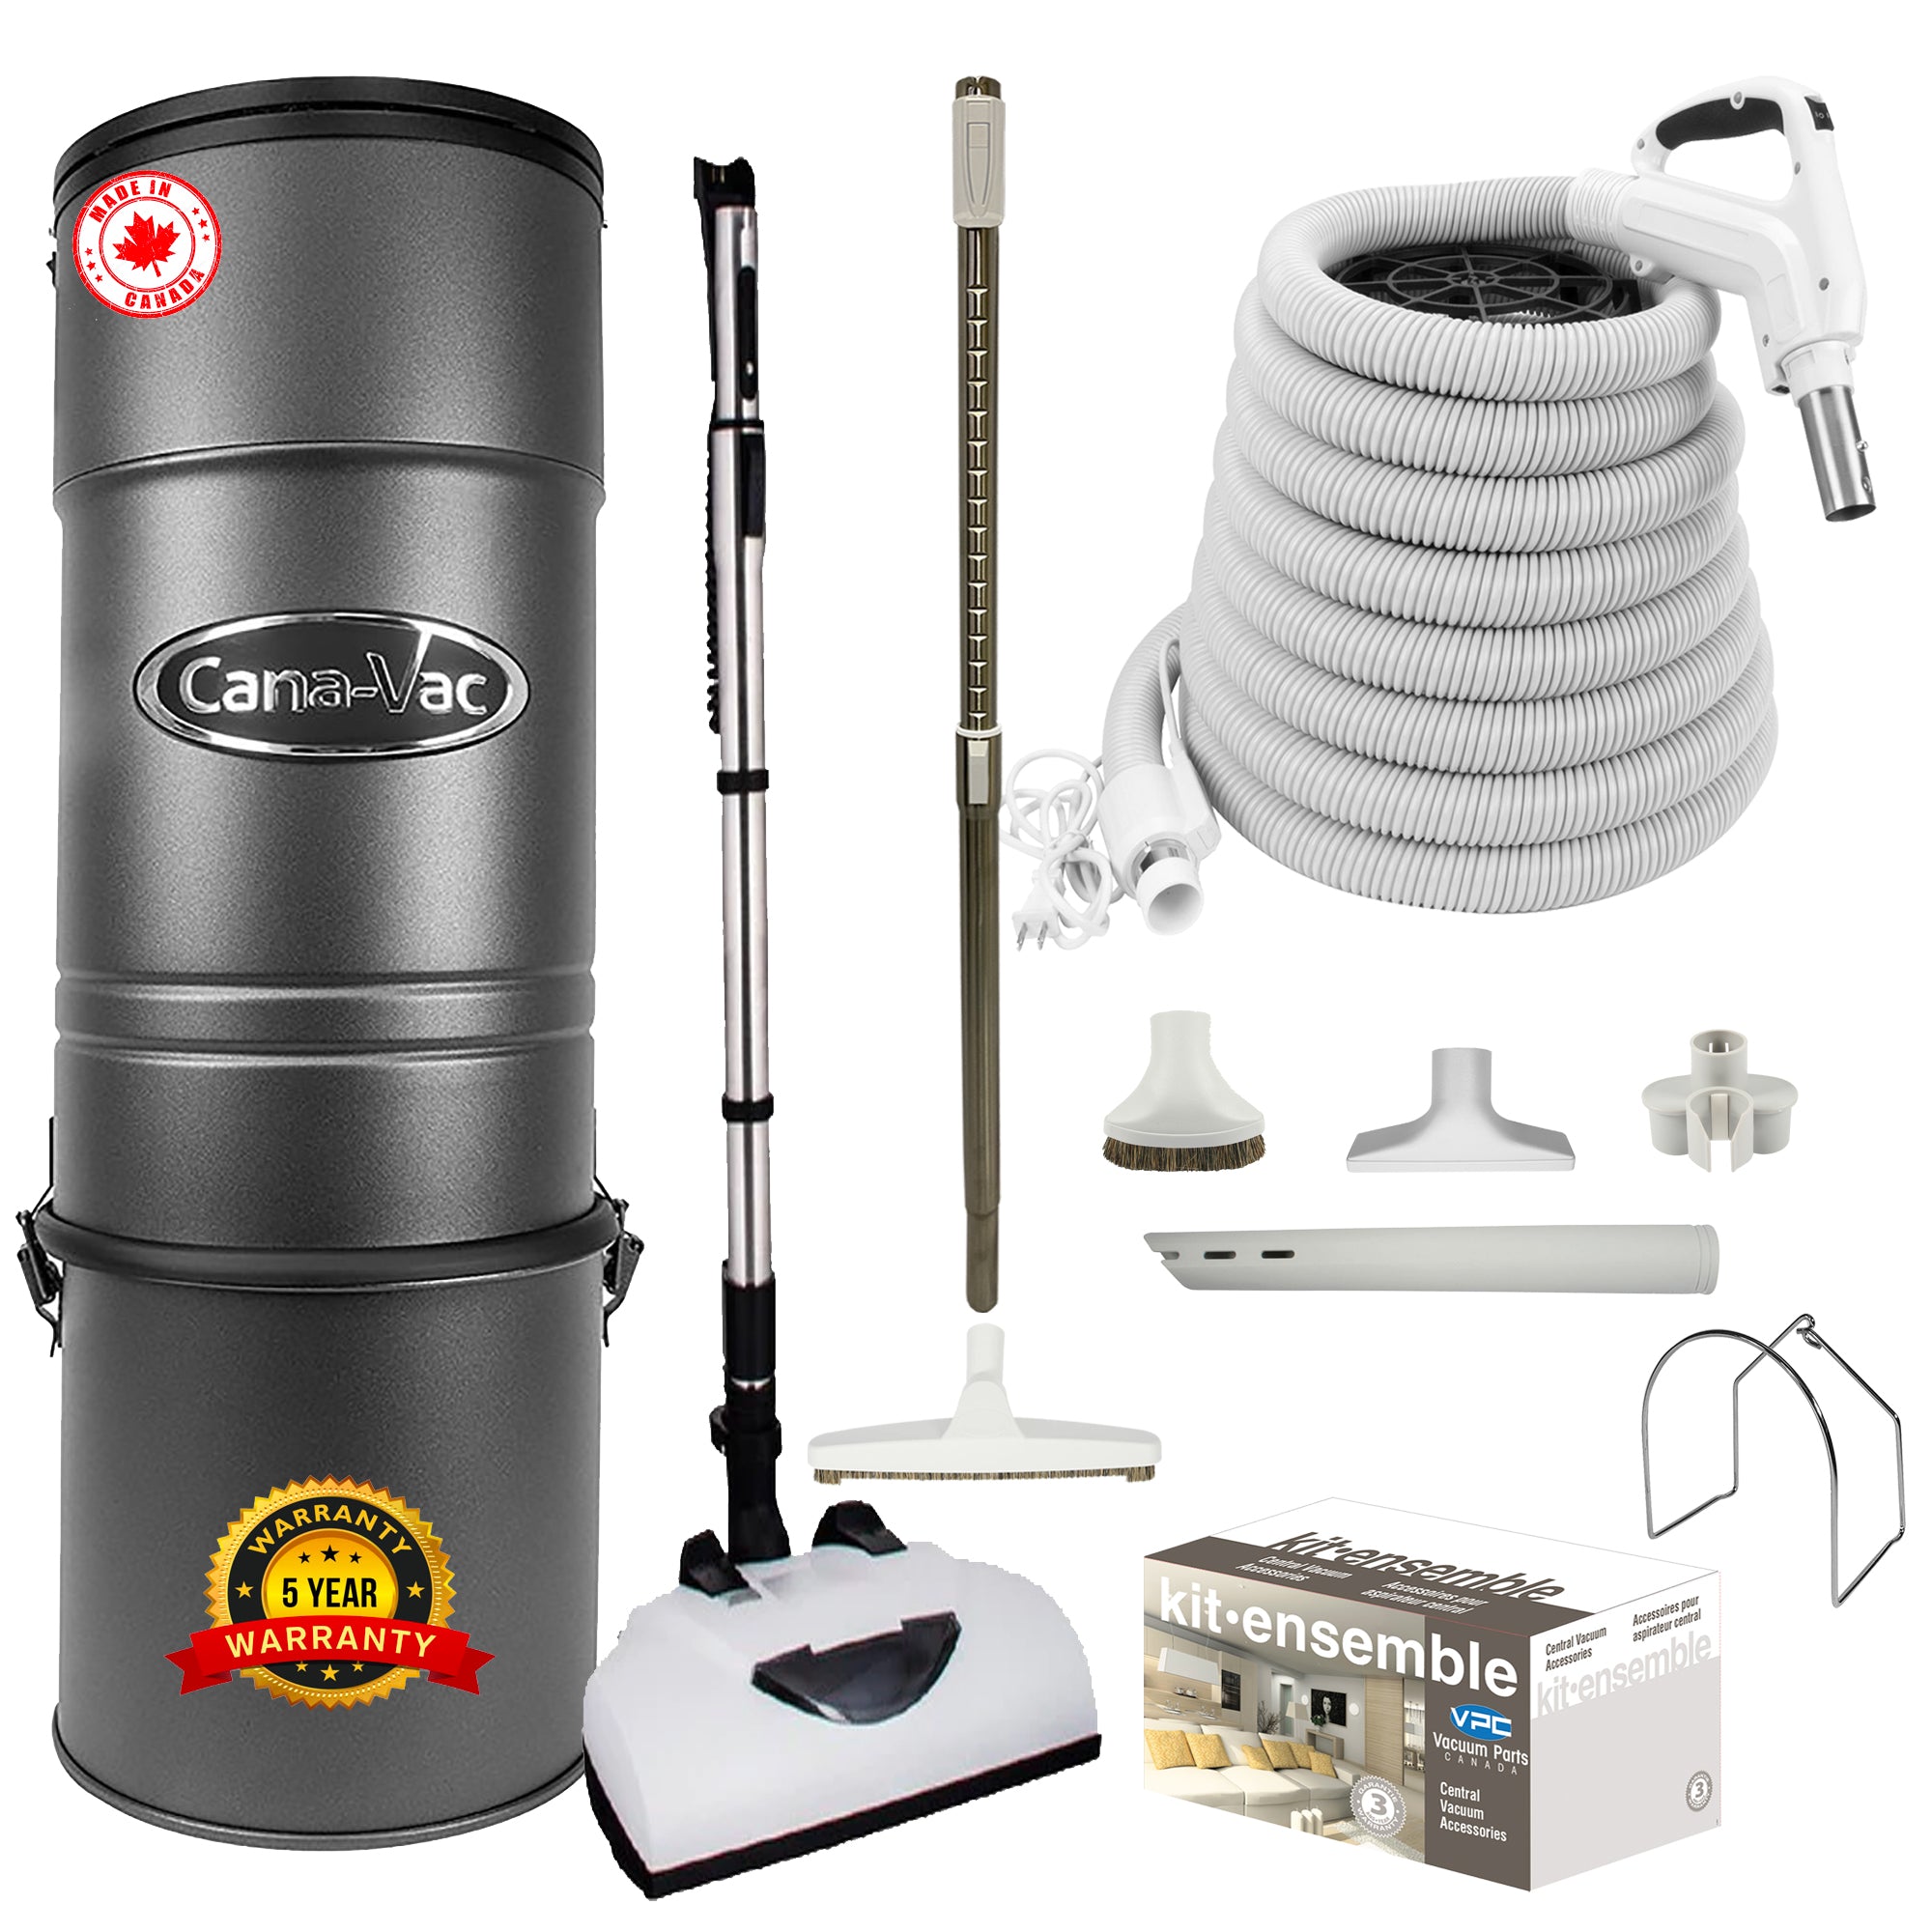 Cana-Vac CV587 Central Vacuum with Deluxe Electric Package (White)